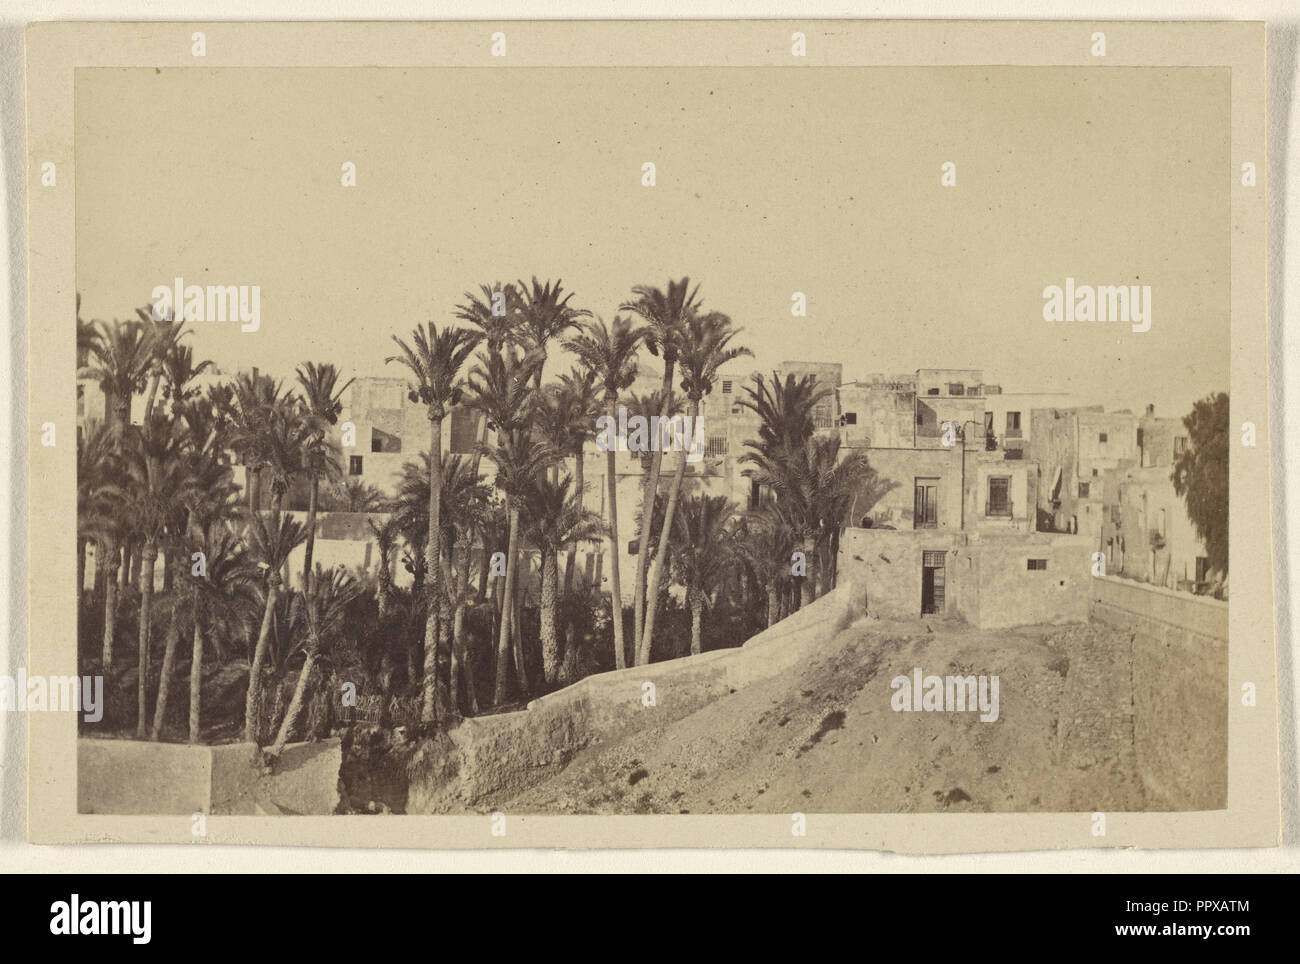 Elche the city of Palms - last foothold of the moors in Spain; J. Planchard y Cia; April 8, 1867; Albumen silver print Stock Photo